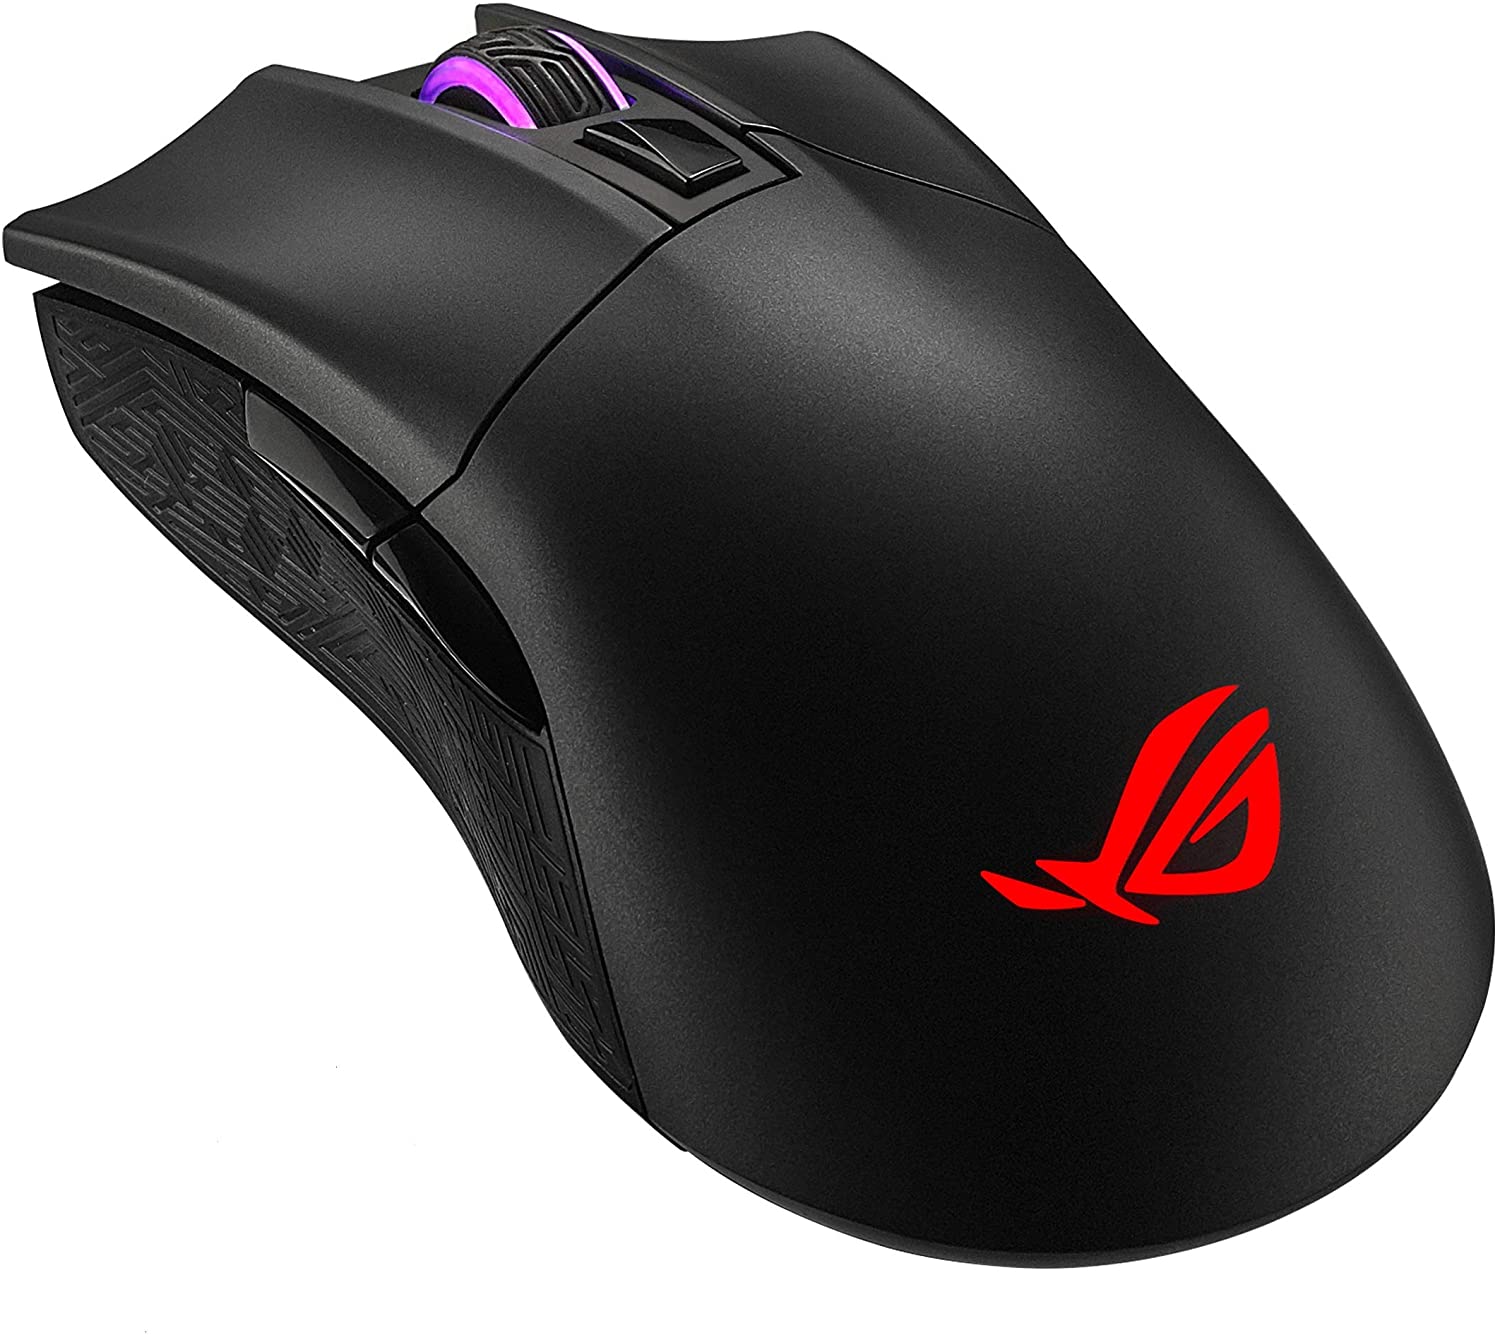 ASUS Wireless Optical Gaming Mouse for PC